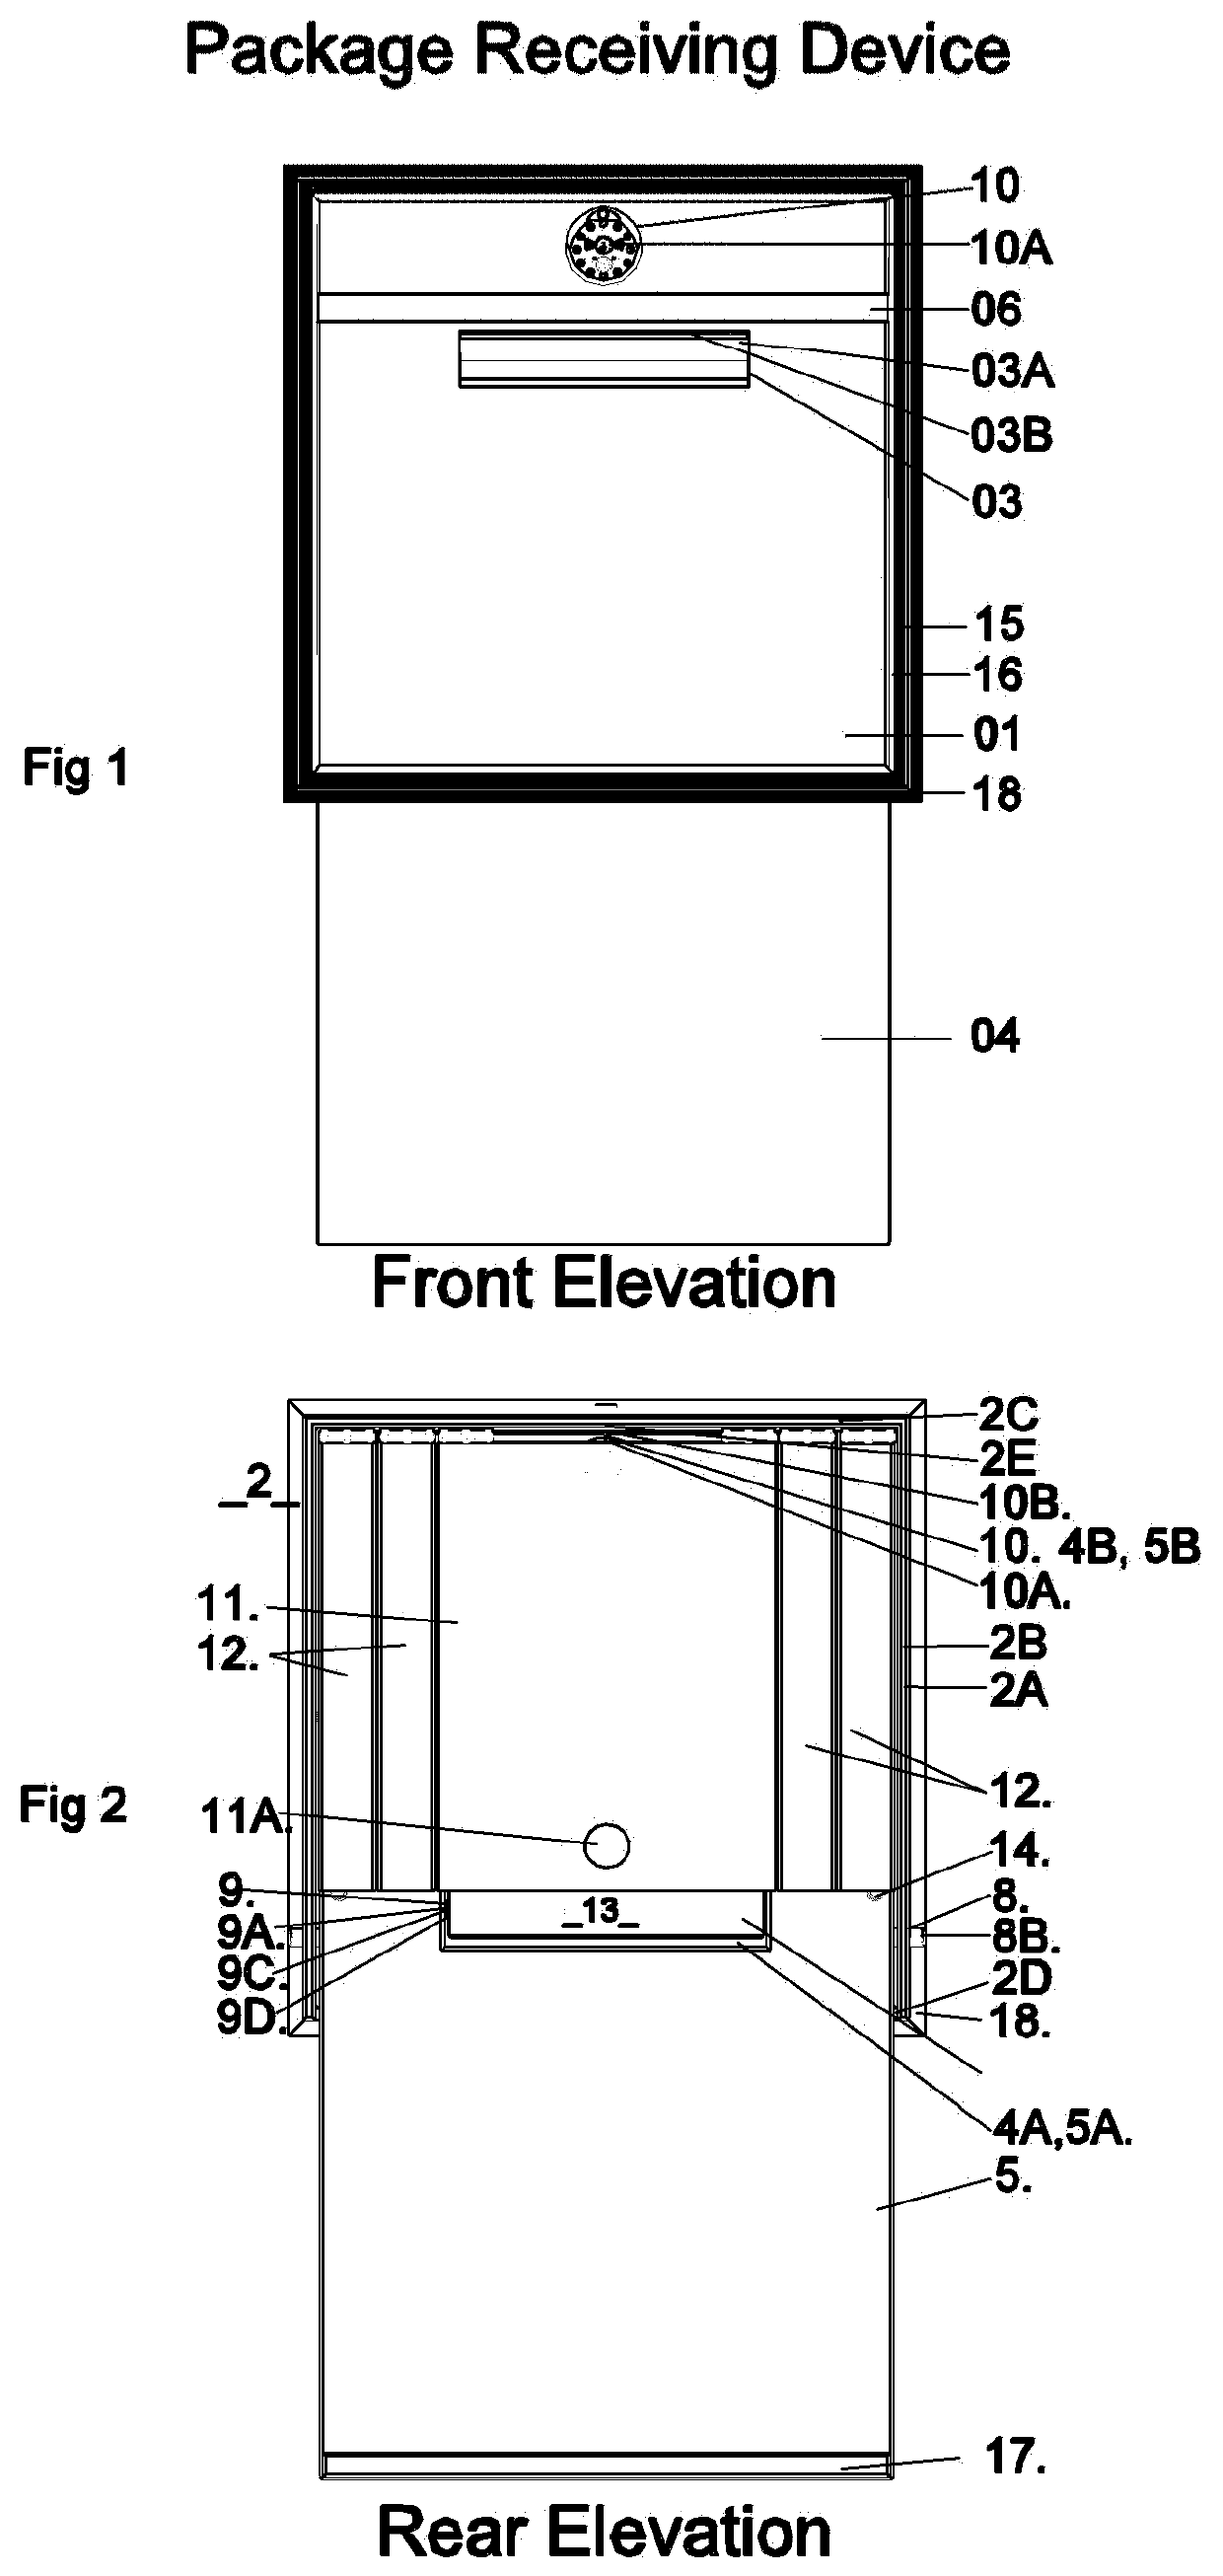 Package Receiving Device